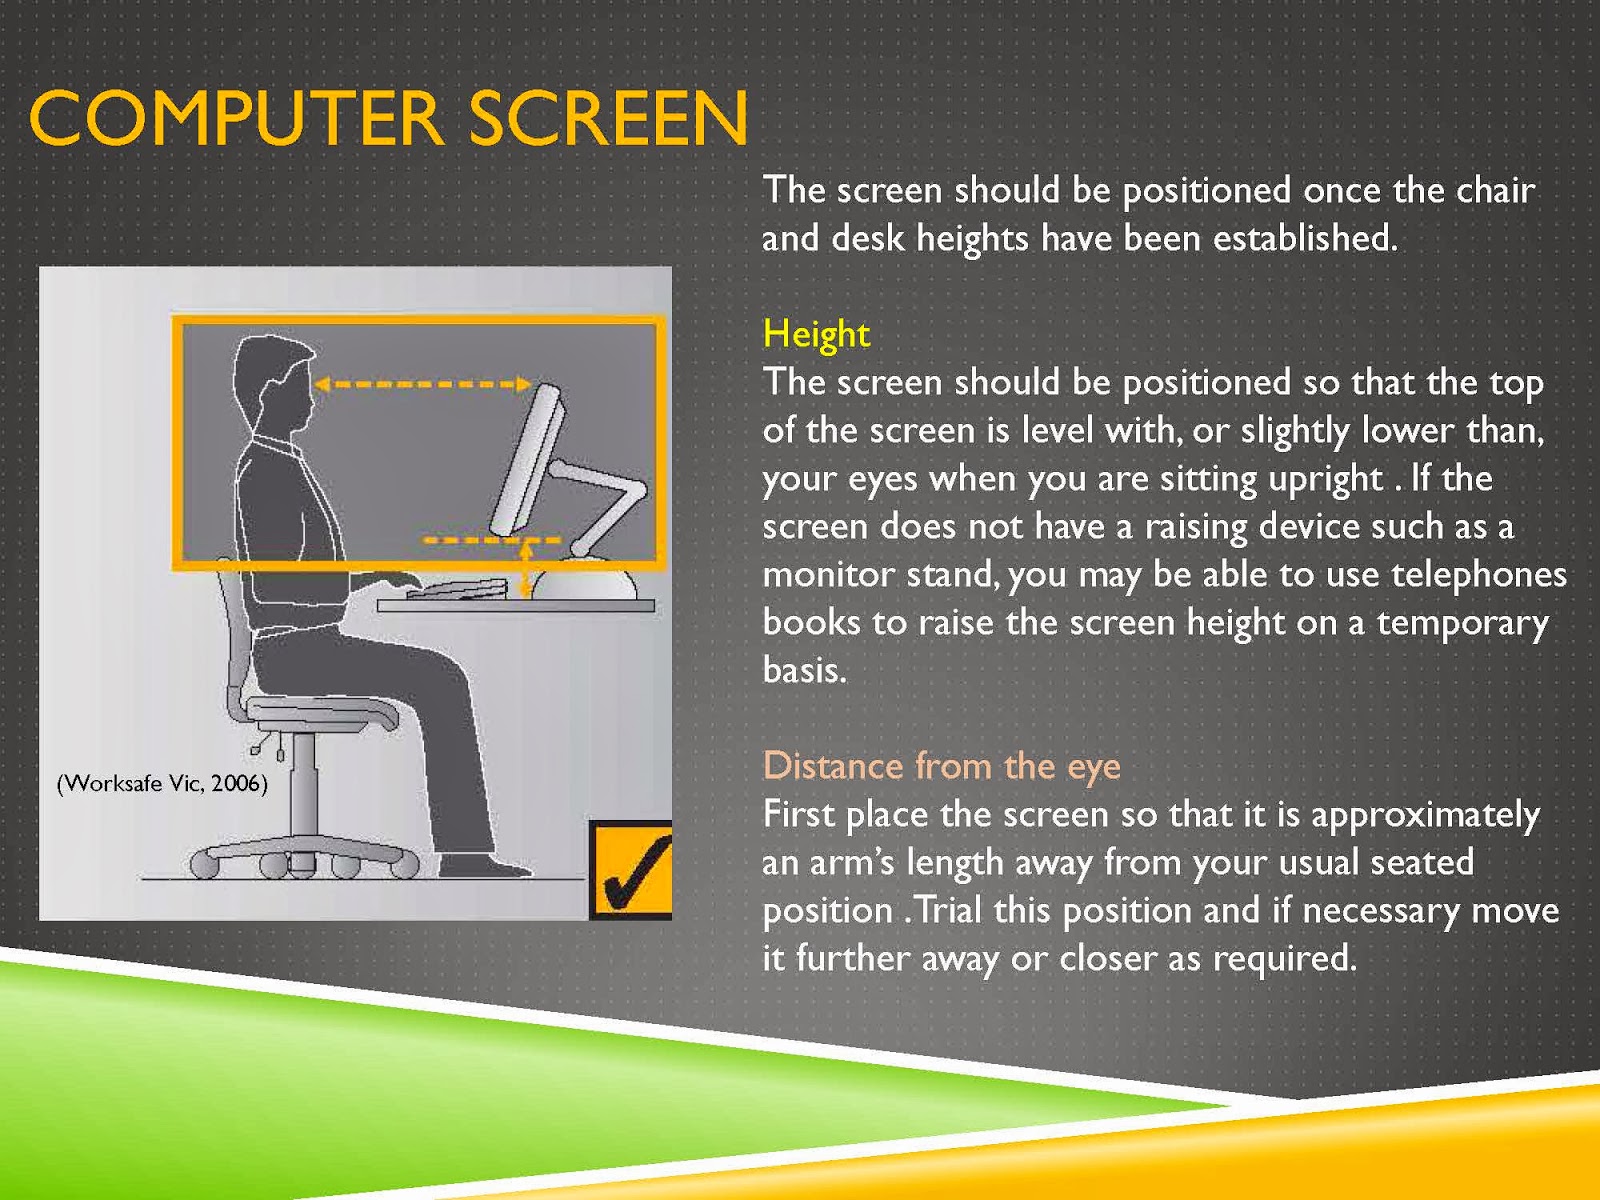 COMPUTER SCREEN HEIGHT AND DISTANCE FROM THE EYE